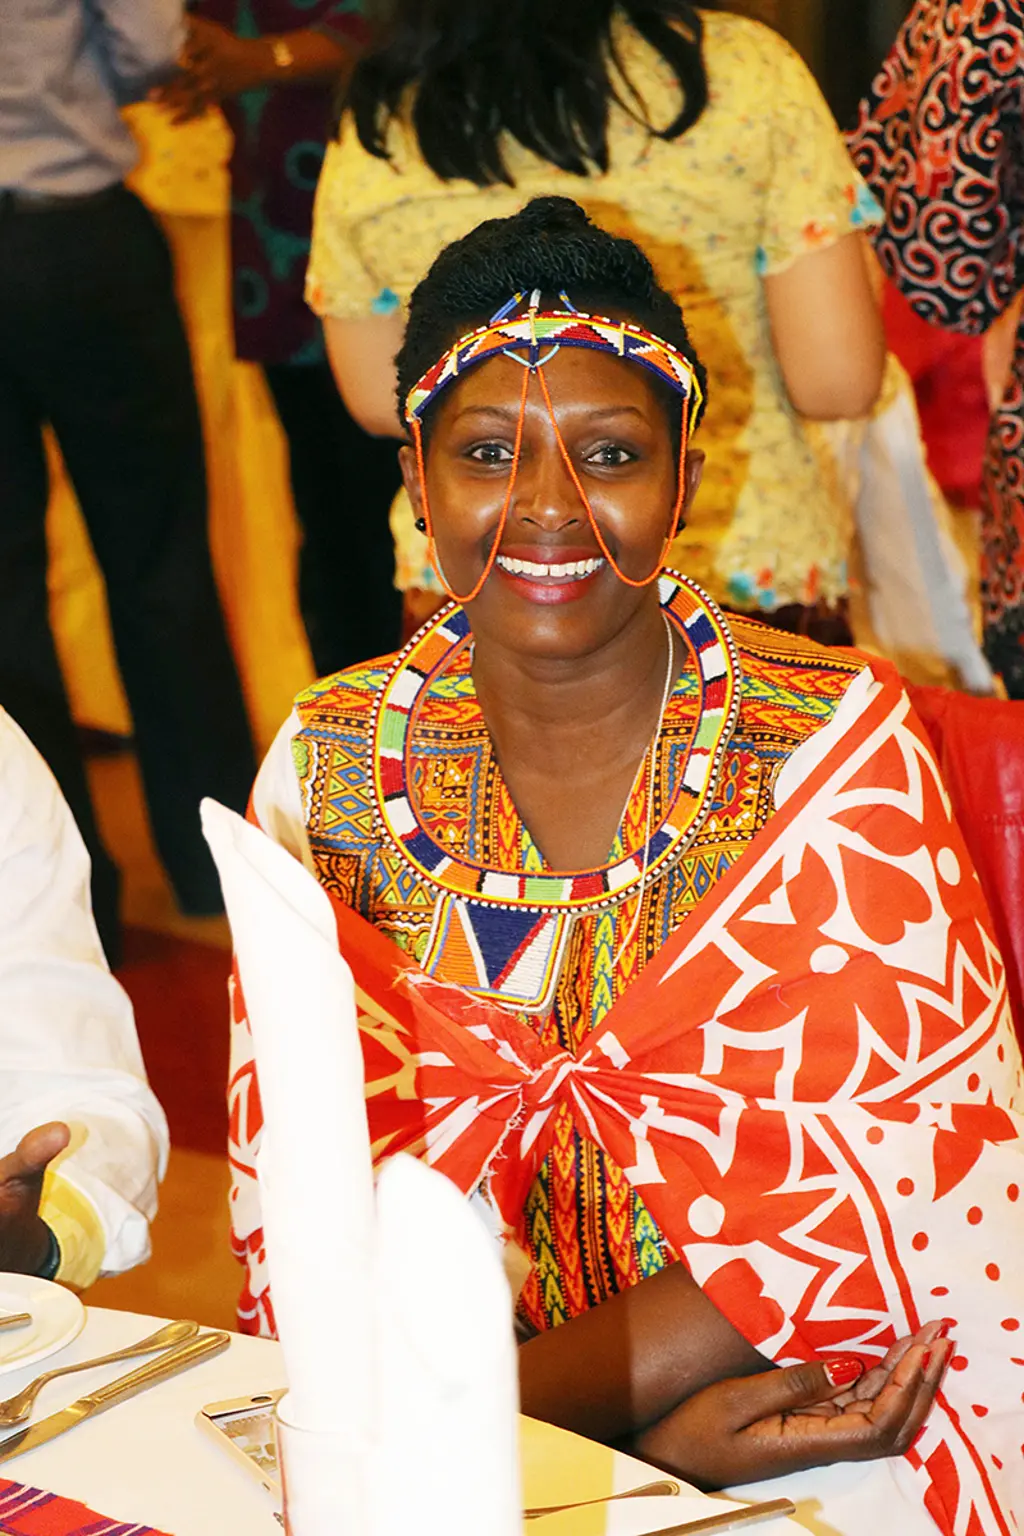 Mary Shompole, an RTI staff member based in Kenya, in traditional clothing